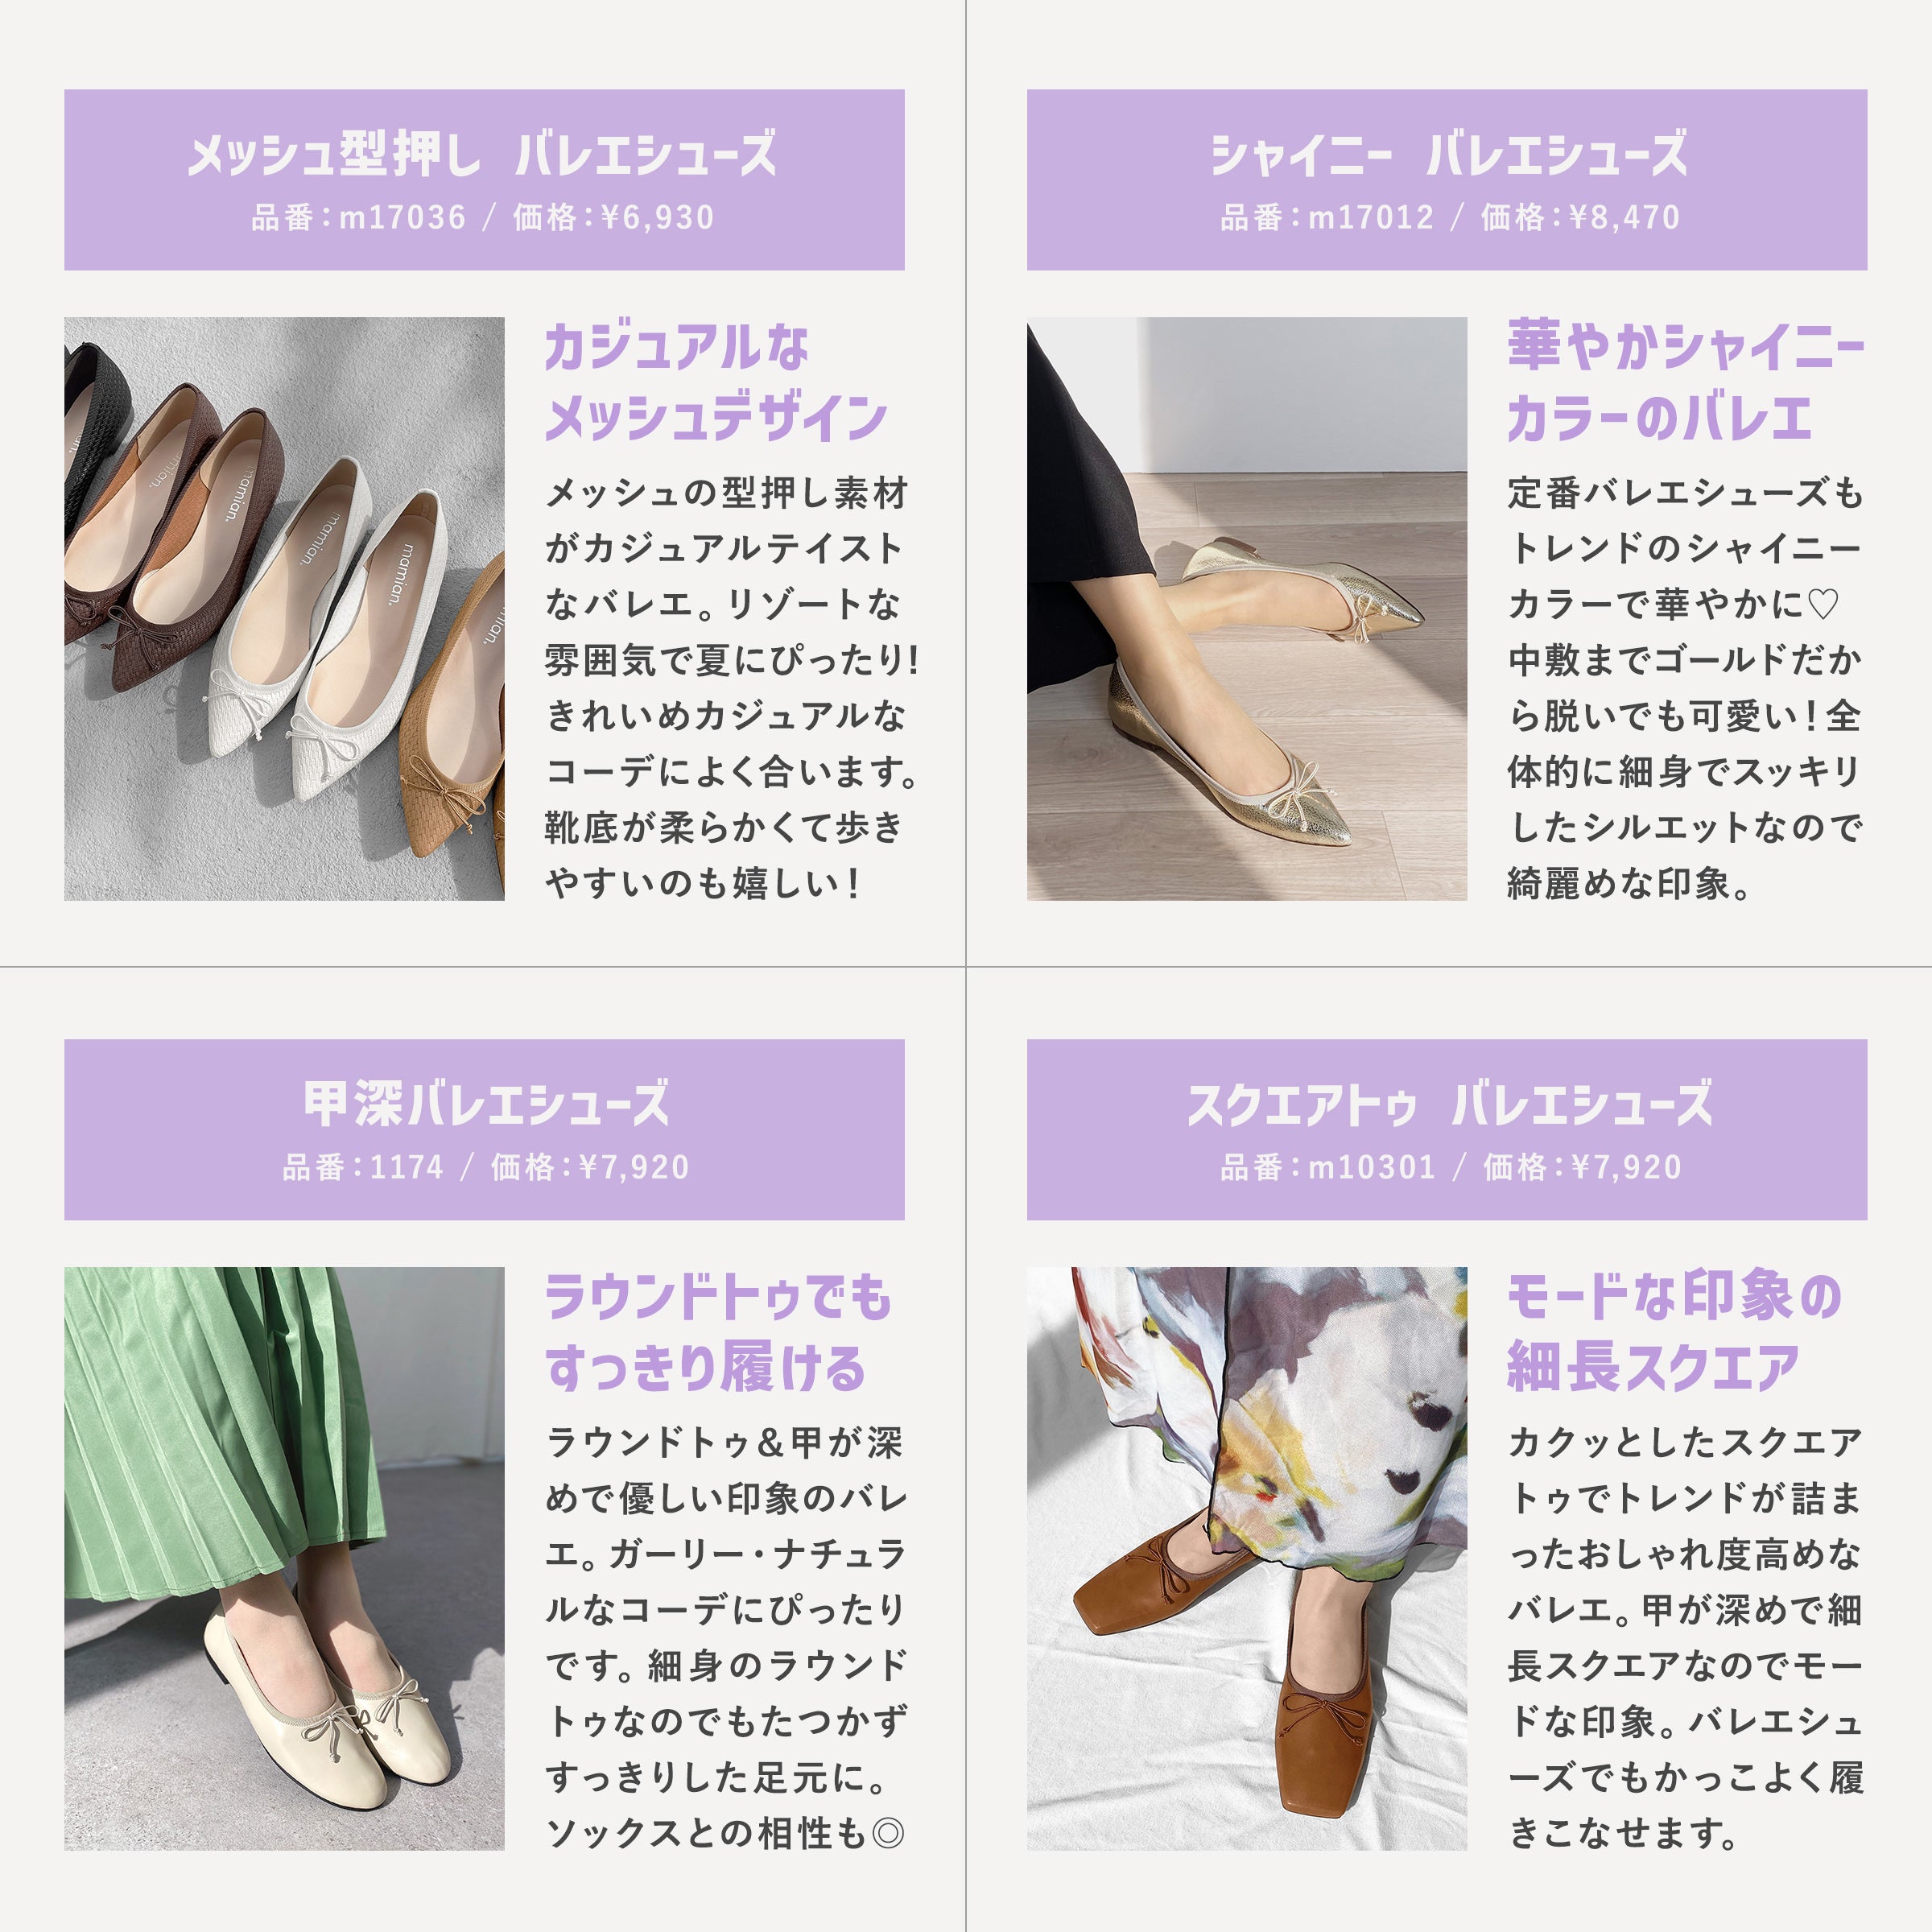 Special feature on ballet shoes of various designs